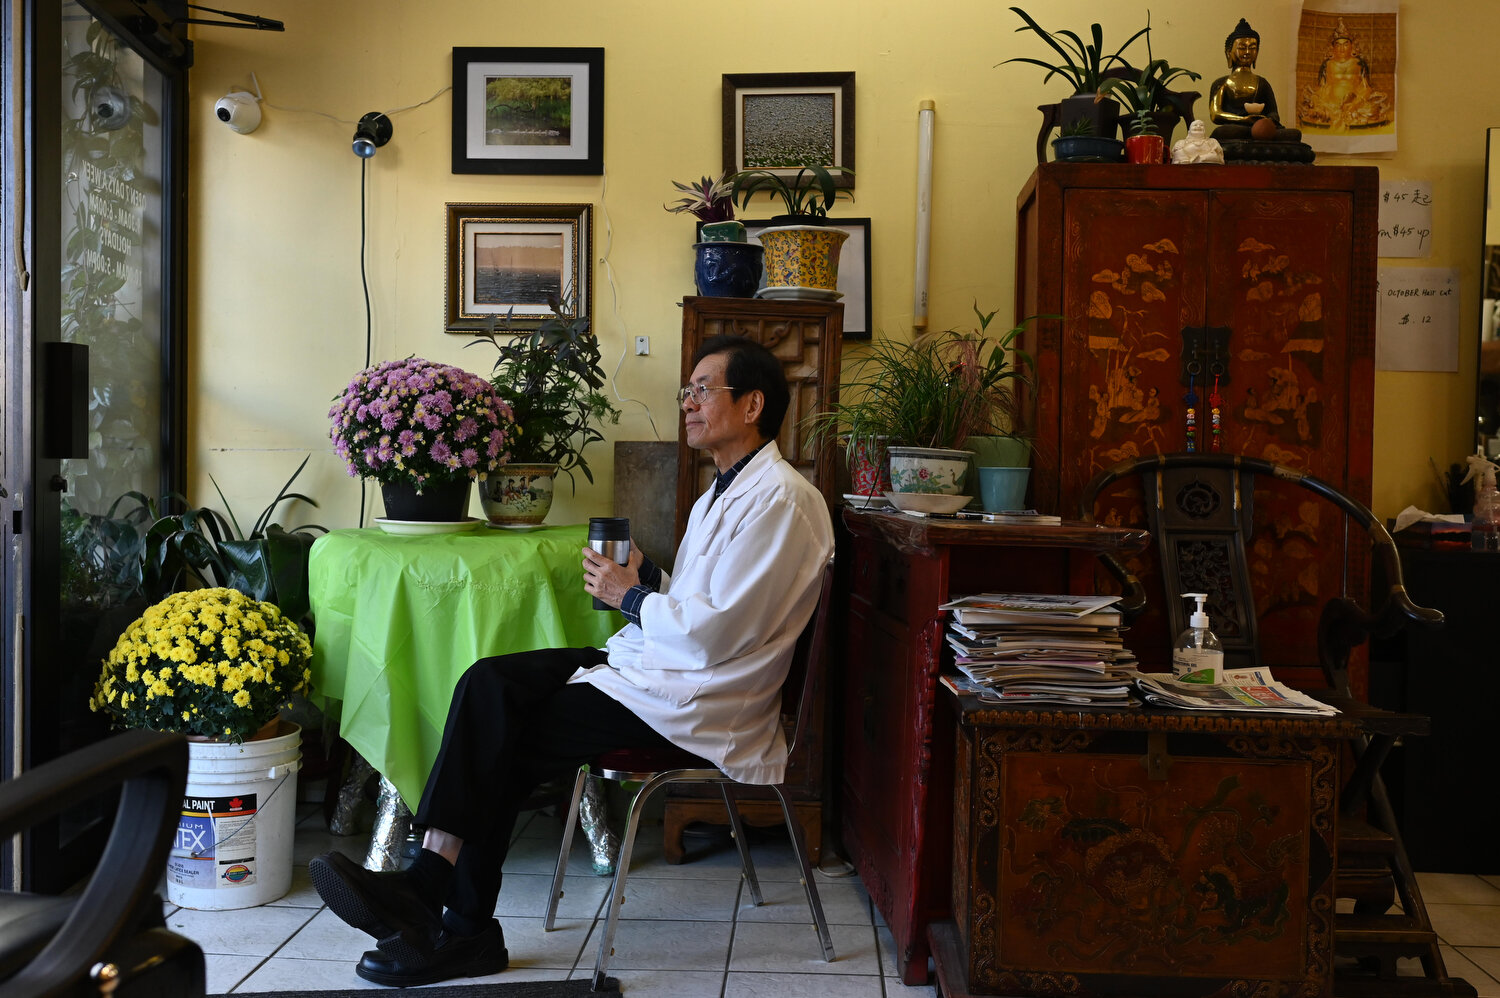  Over the years, Wong often takes his break with a warm drink and sits in this chair, looking out onto Gore Avenue. “Chinatown has changed over the years, sometimes so quickly I cannot keep up. It feels like the old cultural sights are being erased f